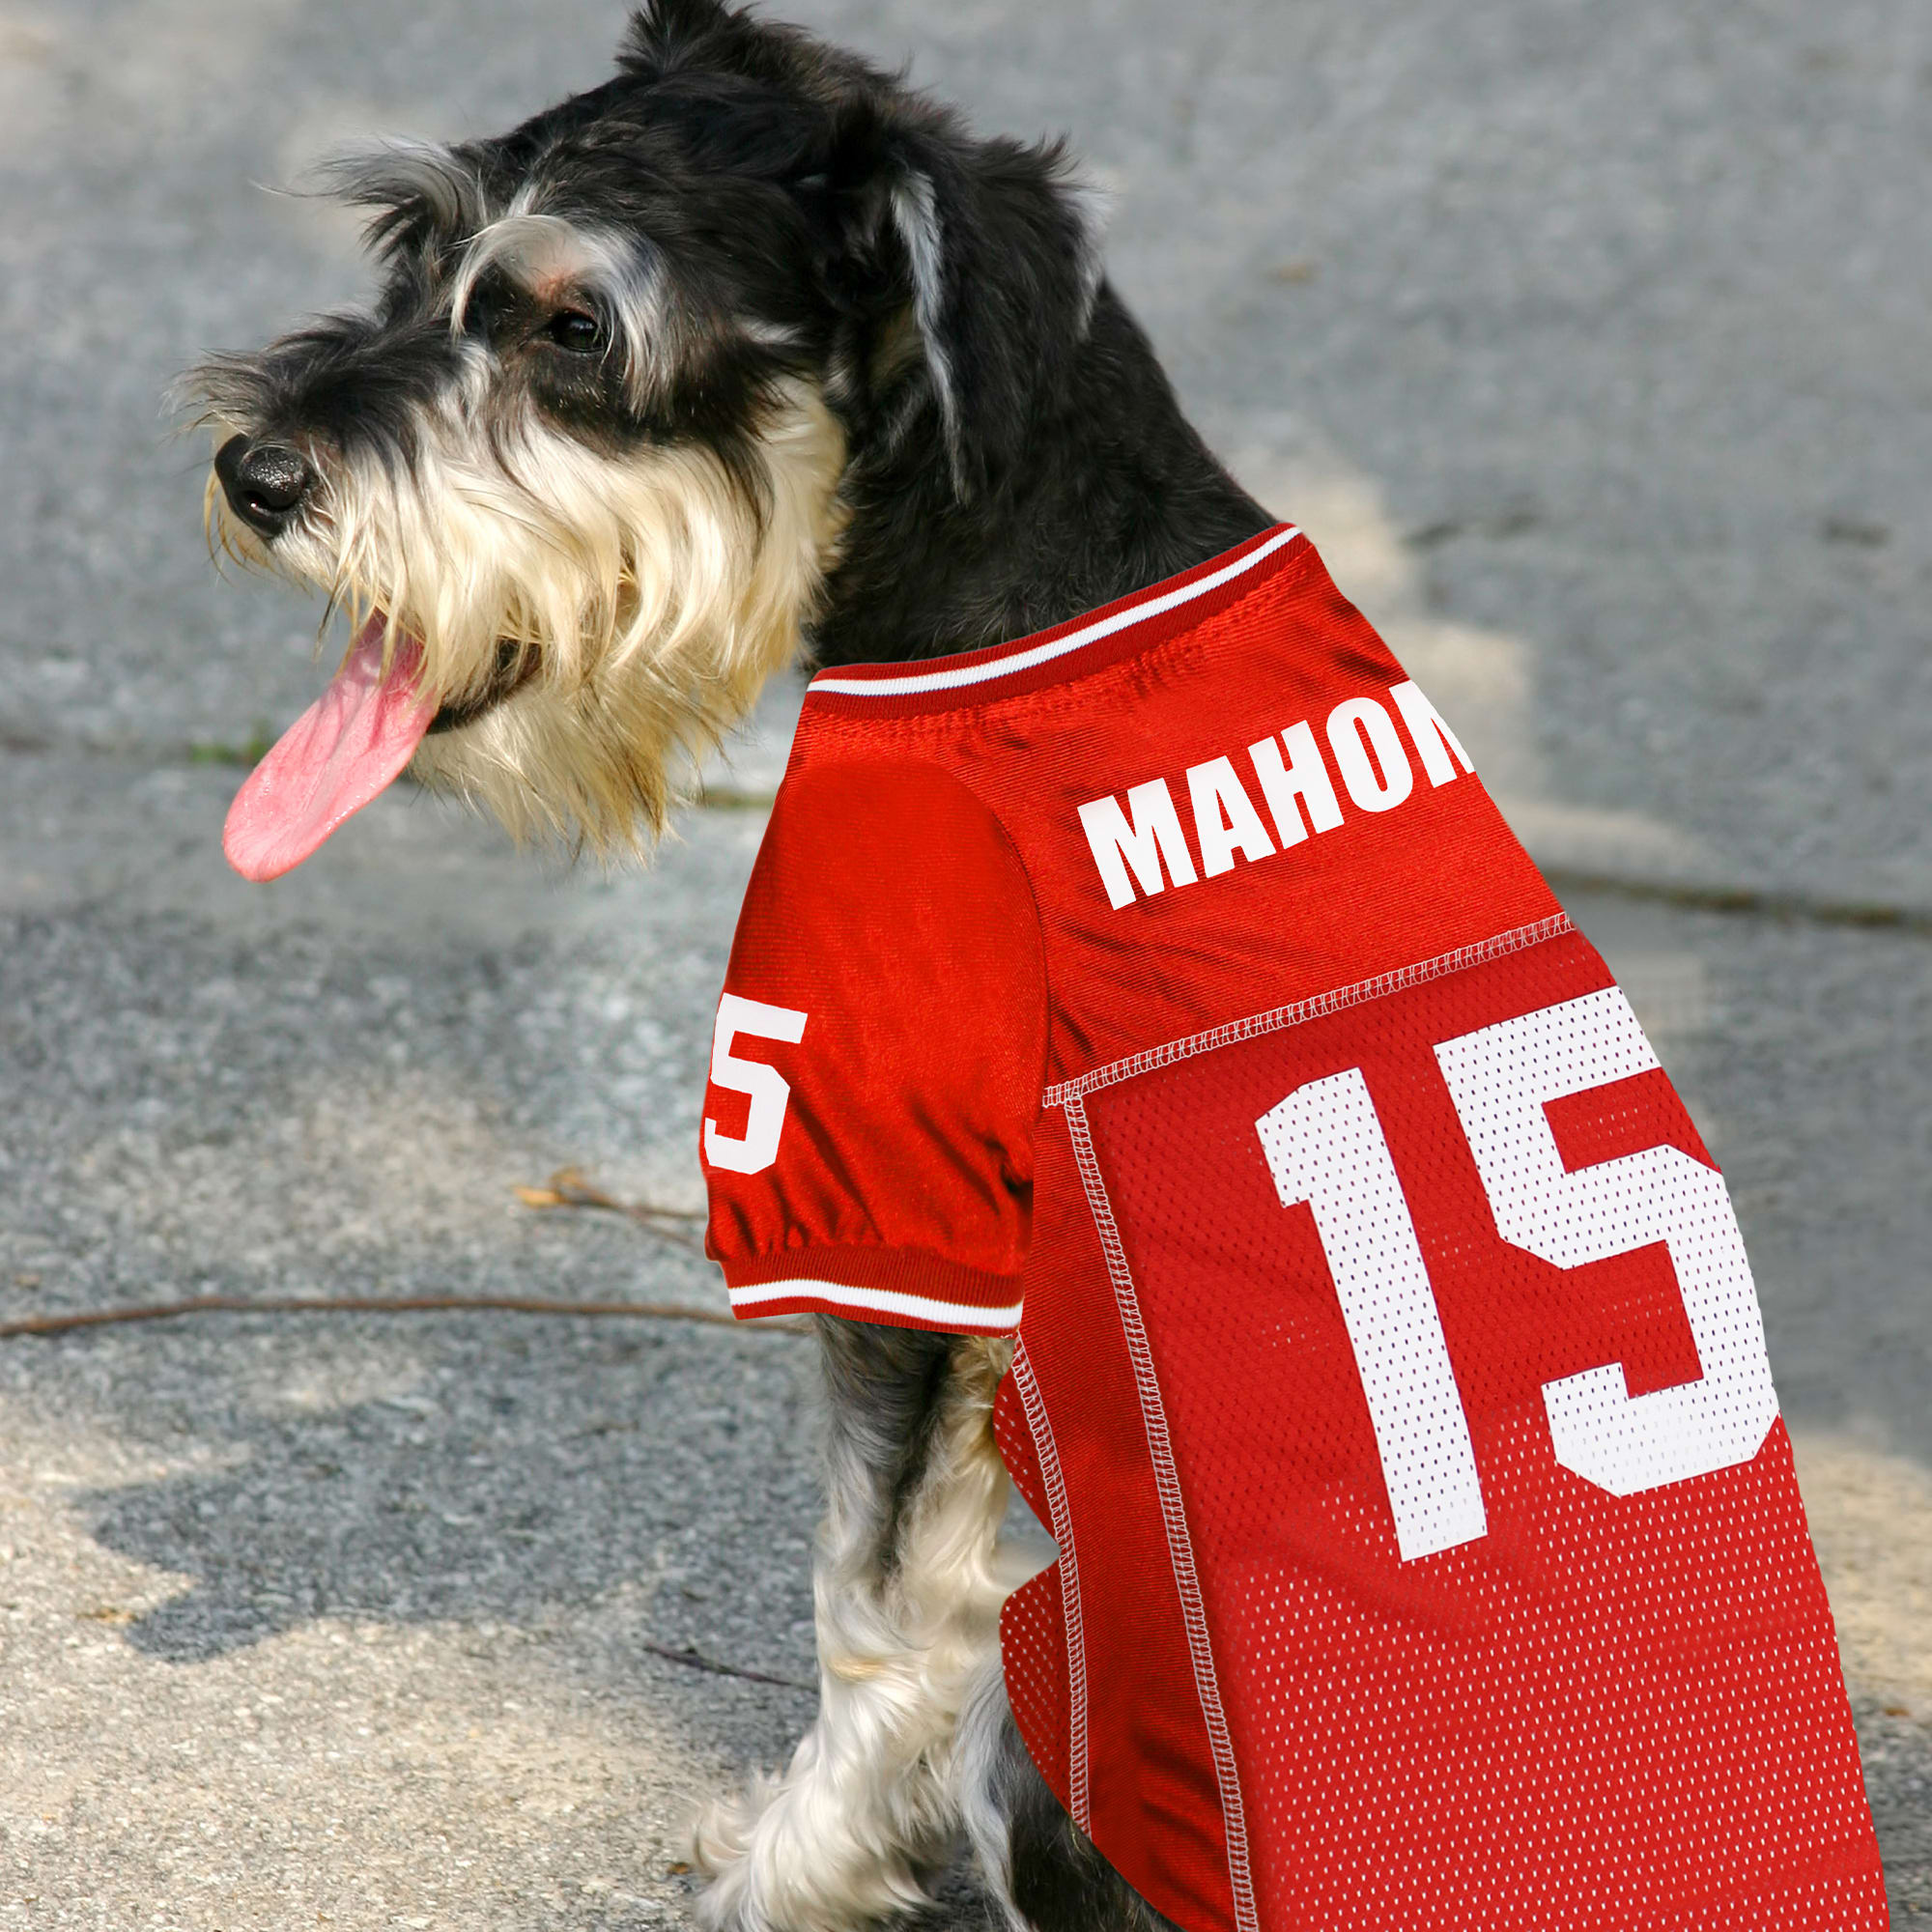 mahomes jersey for dogs